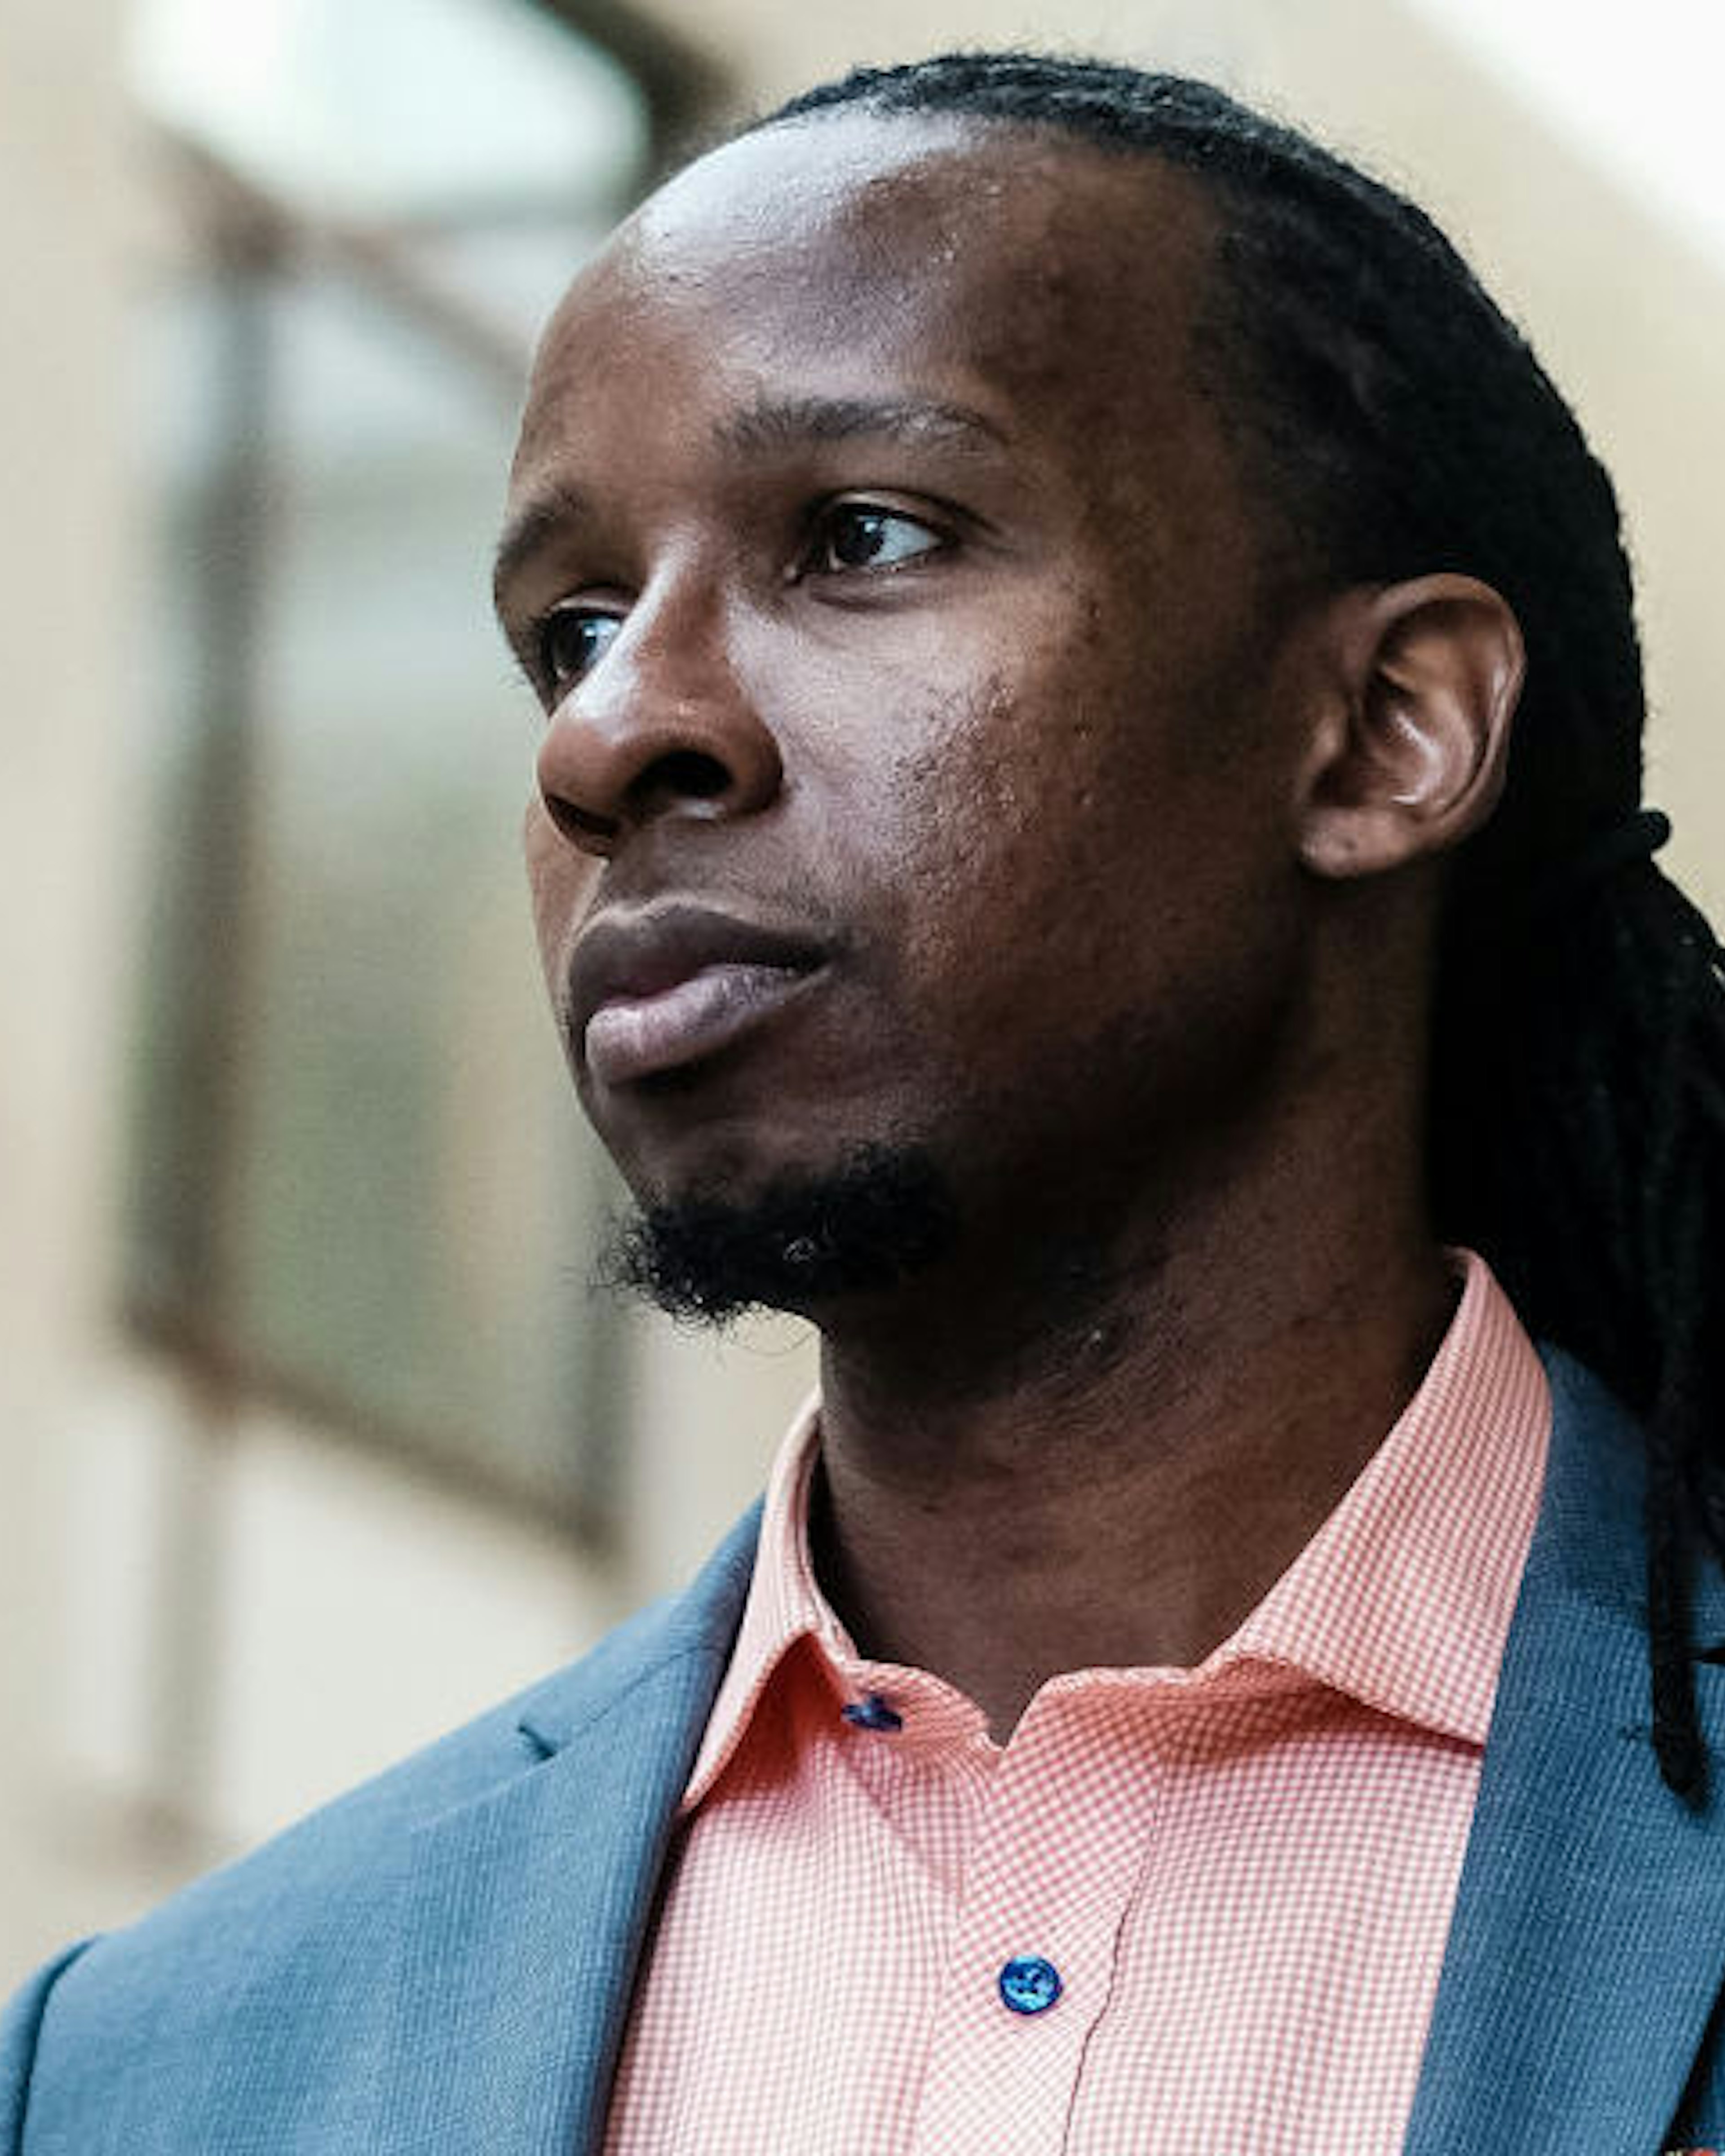 WASHINGTON, US - SEPTEMBER 26: American University professor Dr. Ibram X. Kendi​, stands for a portrait at the School of International Service following a panel discussion on his new book “ How to Be an Antiracist” in Washington, DC. Kendi’s discussion spoke on strategies to identify and overcome racism on September 26, 2019 in Washington, DC. (Michael A. McCoy/For The Washington Post)